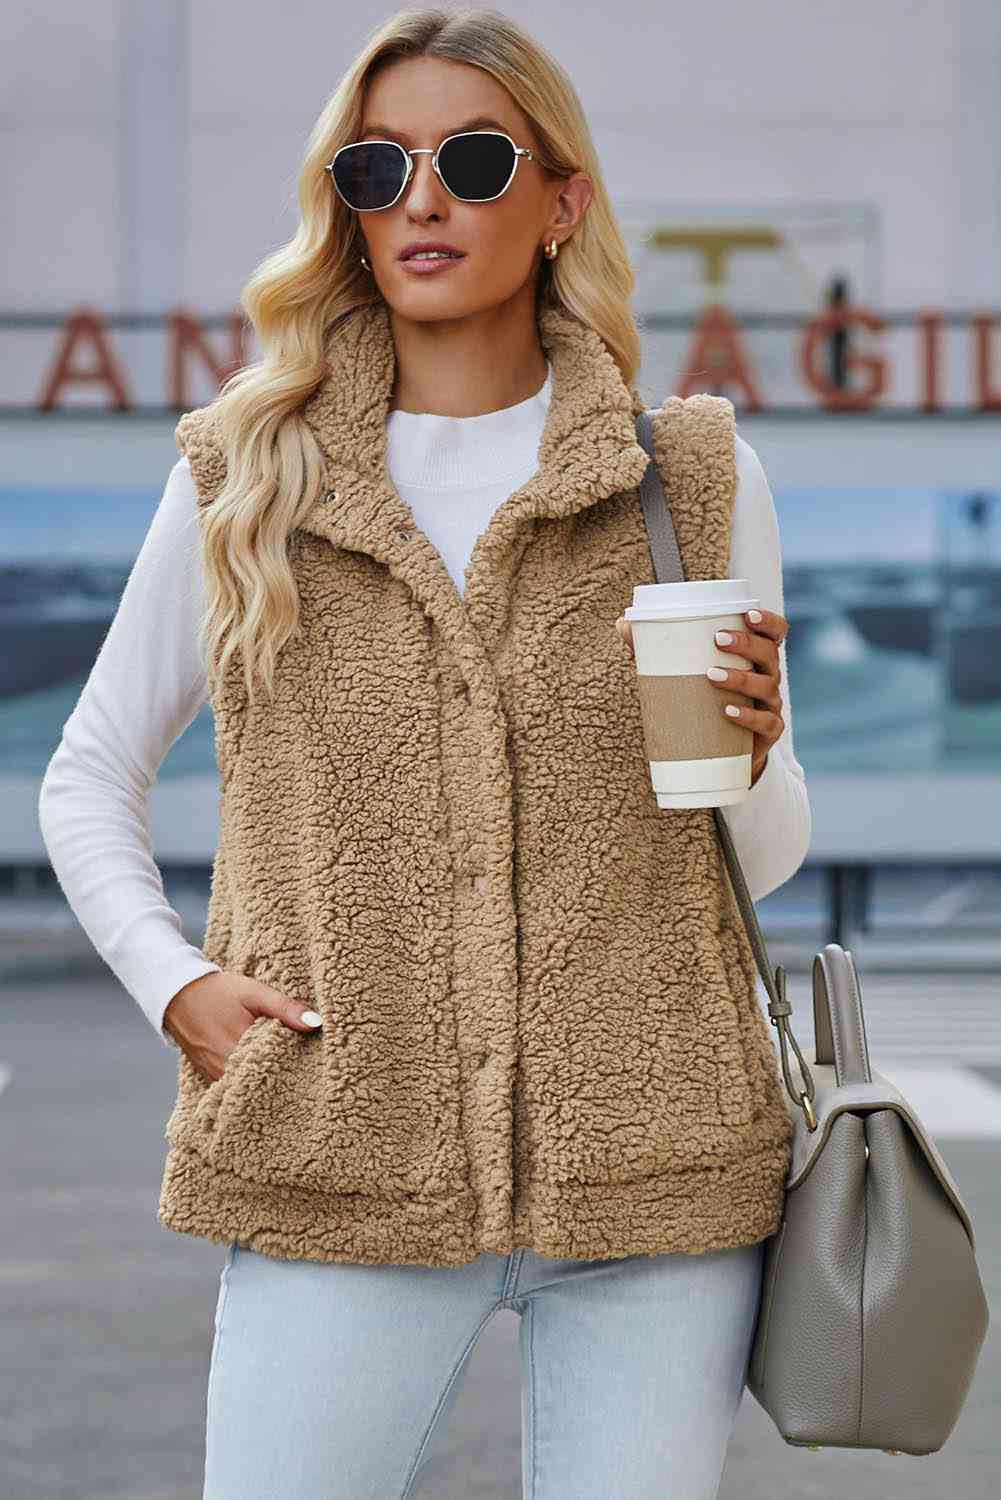 Snap Down Vest with Pockets - Brown / S - Women’s Clothing & Accessories - Vests - 1 - 2024